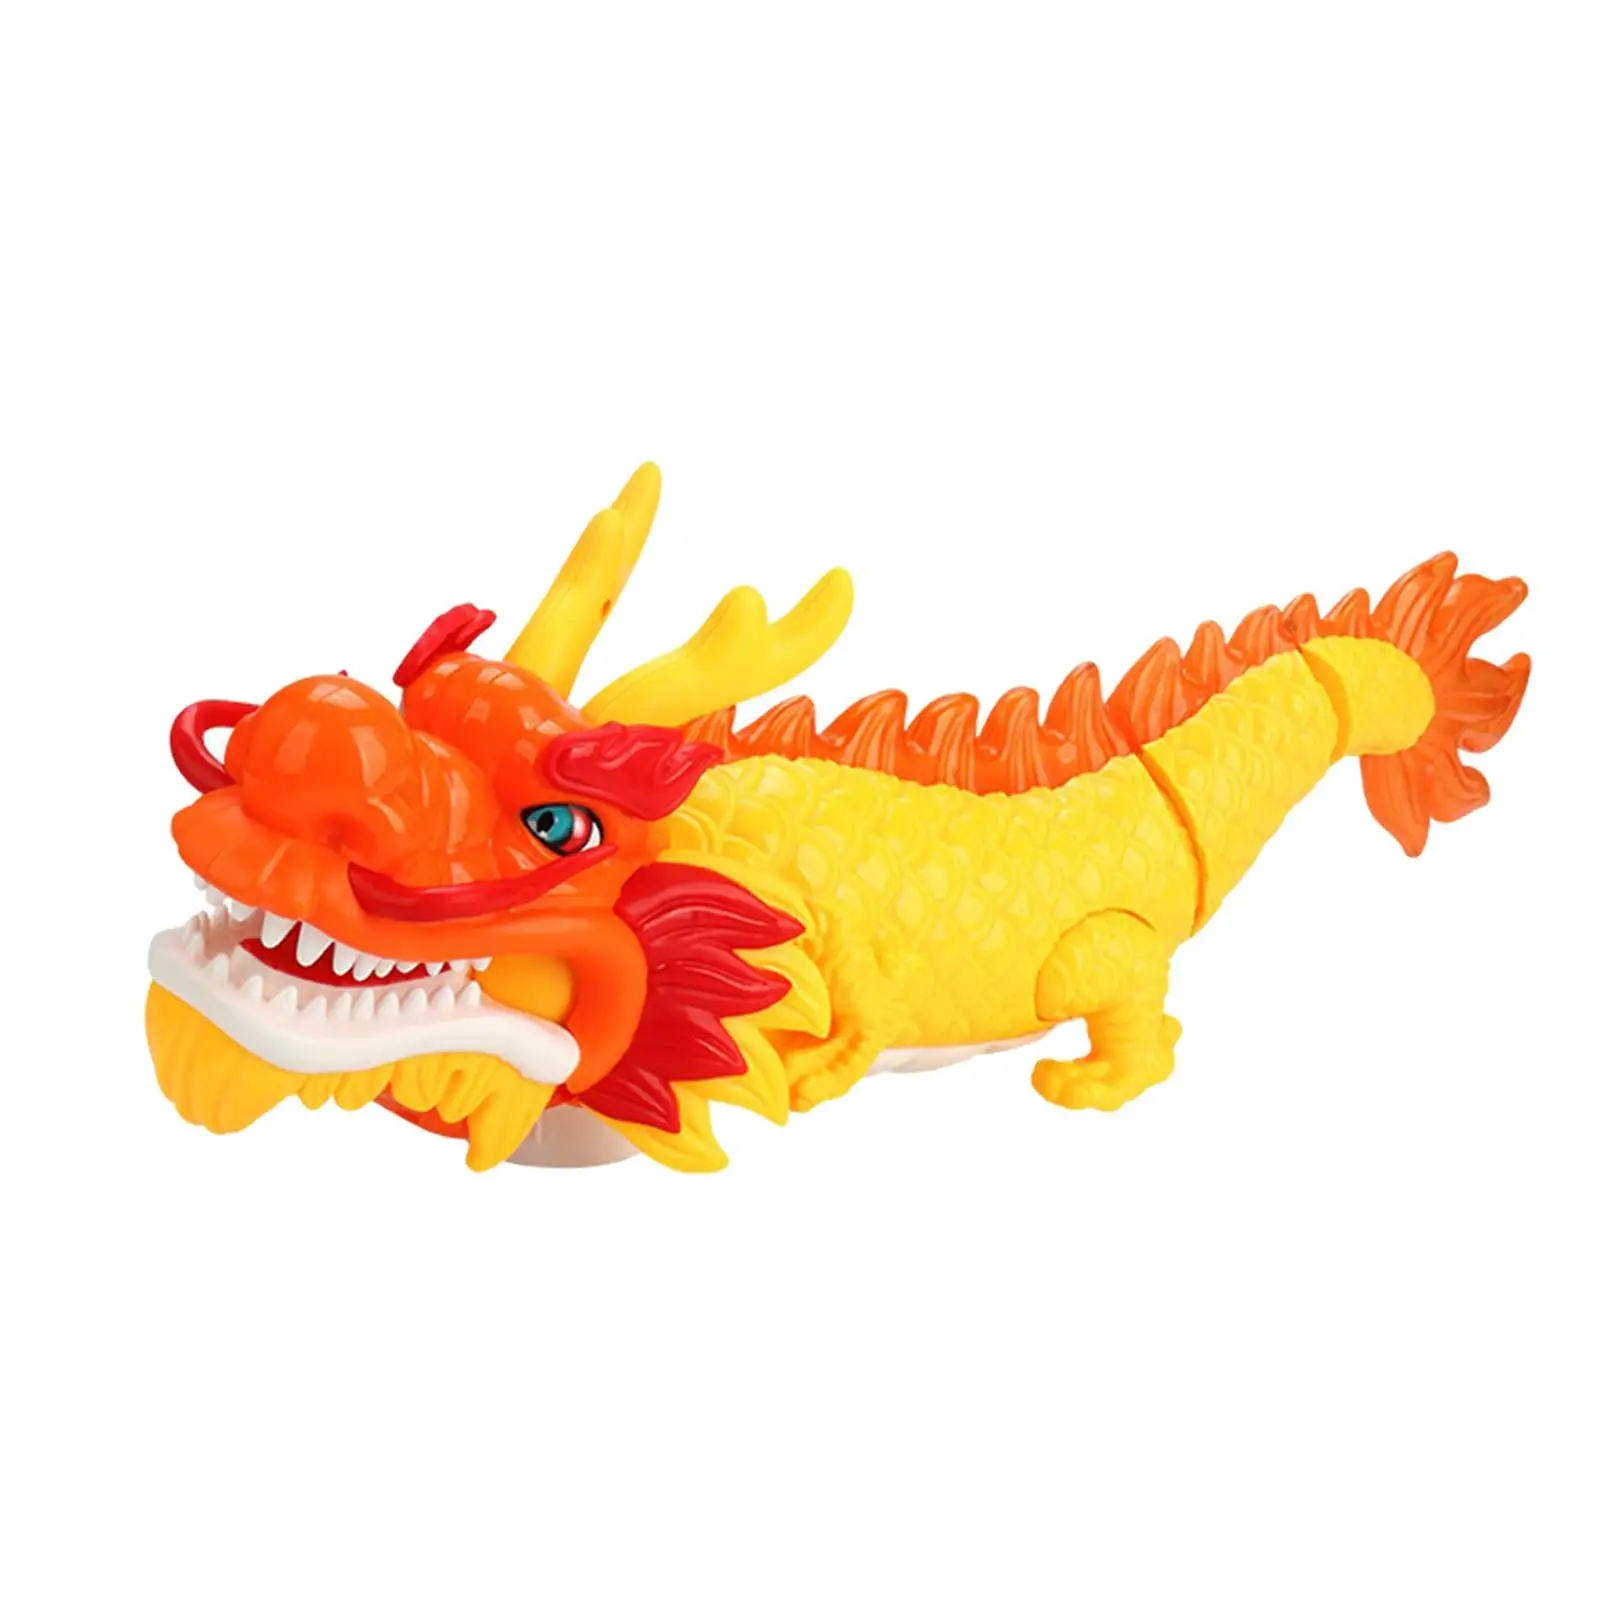 Eletric Dragon Toy Realistic Creative Mechanical Dragons Toy Gifts Animal Flexible for Adults Children Kid Age 8-12 Girls